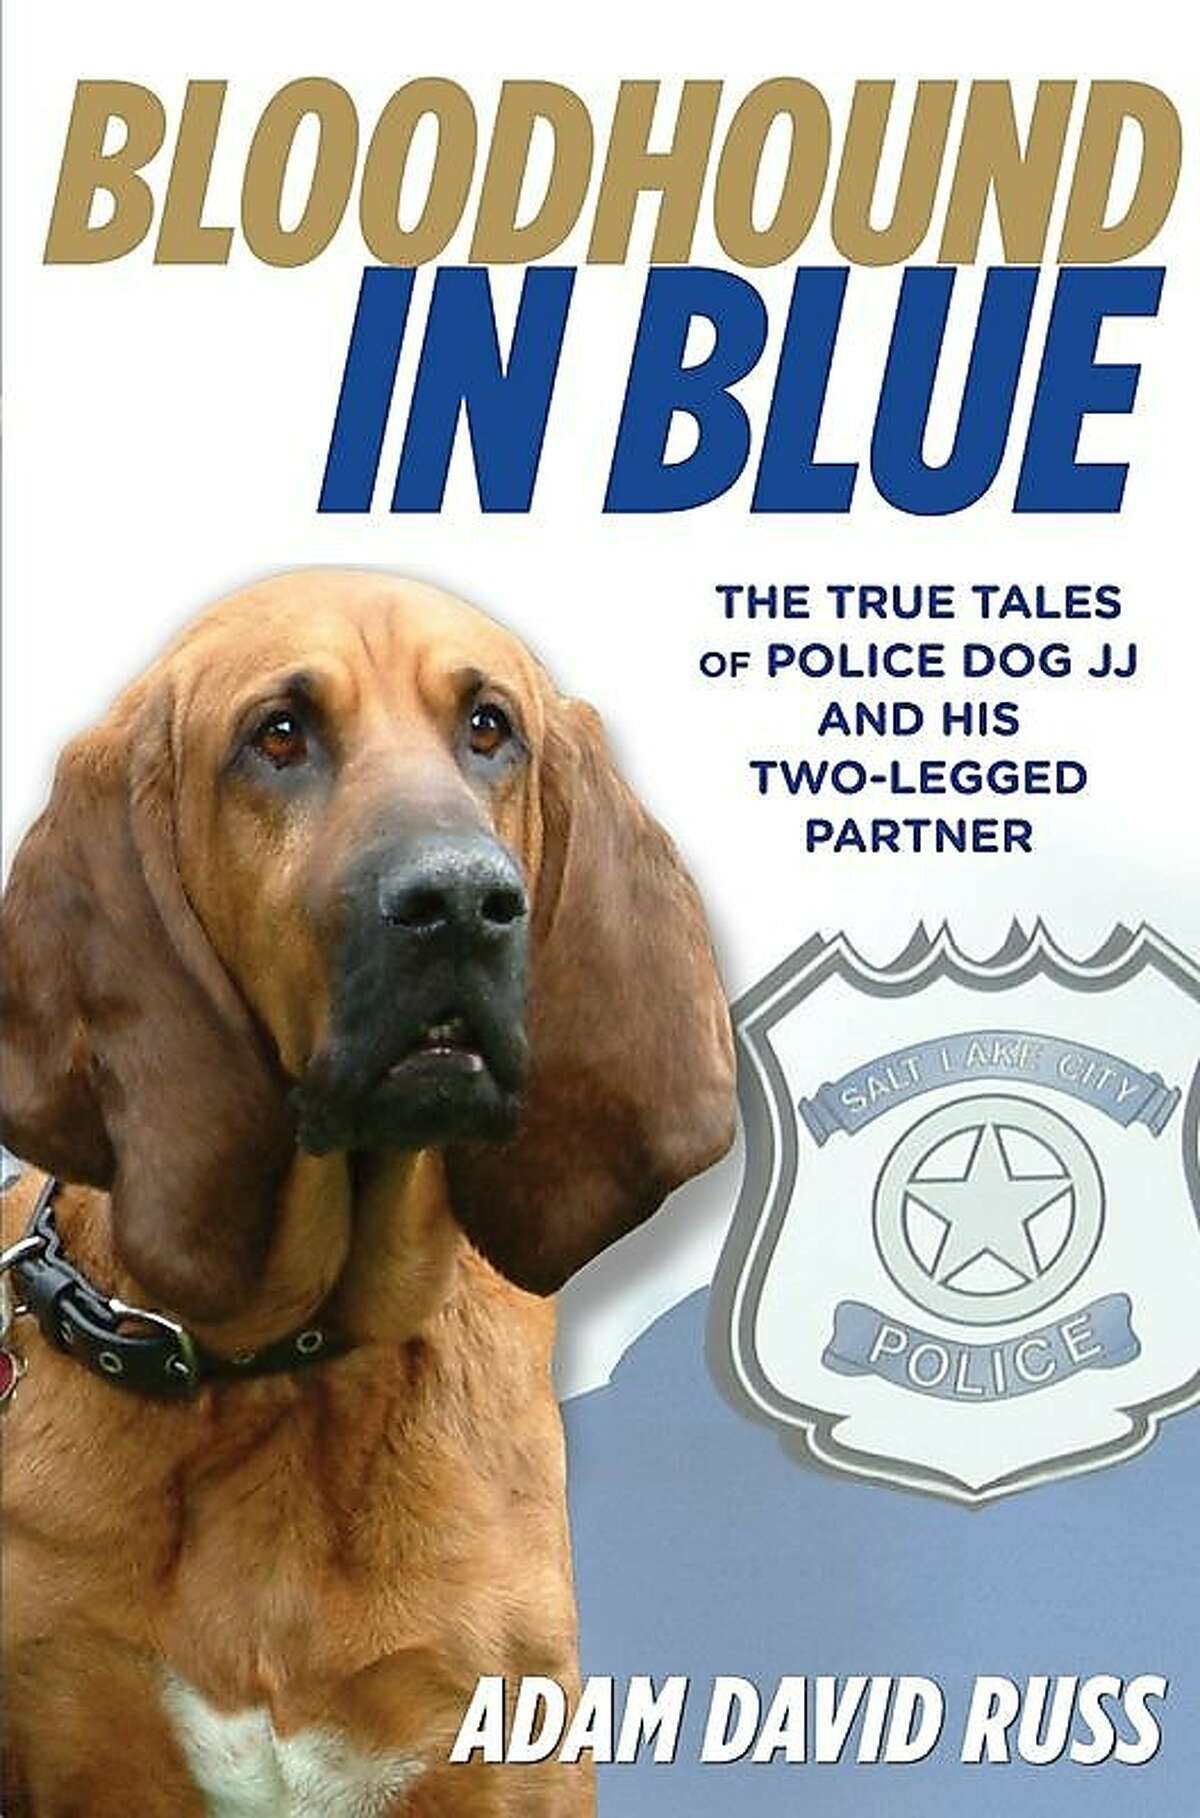 Local author Adam Russ's new book, "Bloodhound in Blue" chronicles the tales of heroic police dog JJ and his handler, Salt Lake City Police Officer Mike Serio.